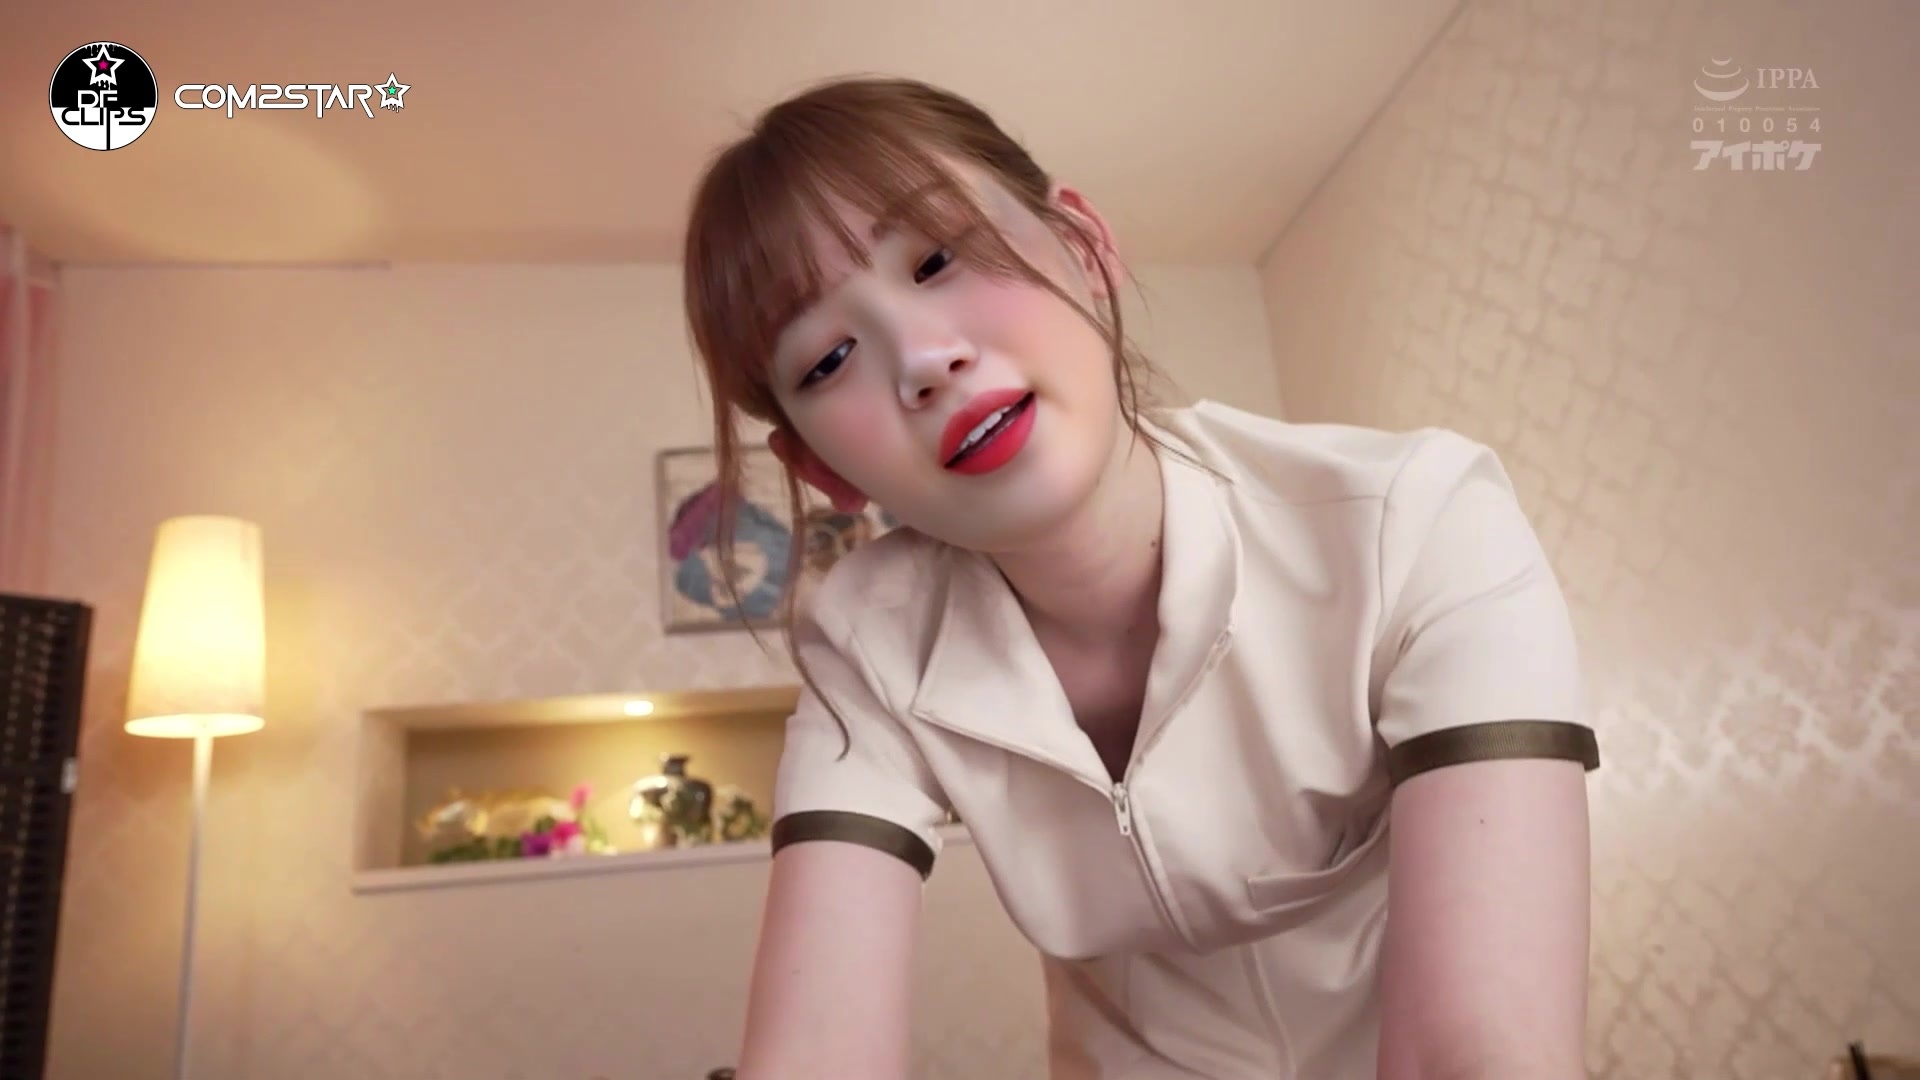 Sexy masseur loves sex with clients - ai Chaewon (アイズワン 本物の偽物) [PREMIUM]